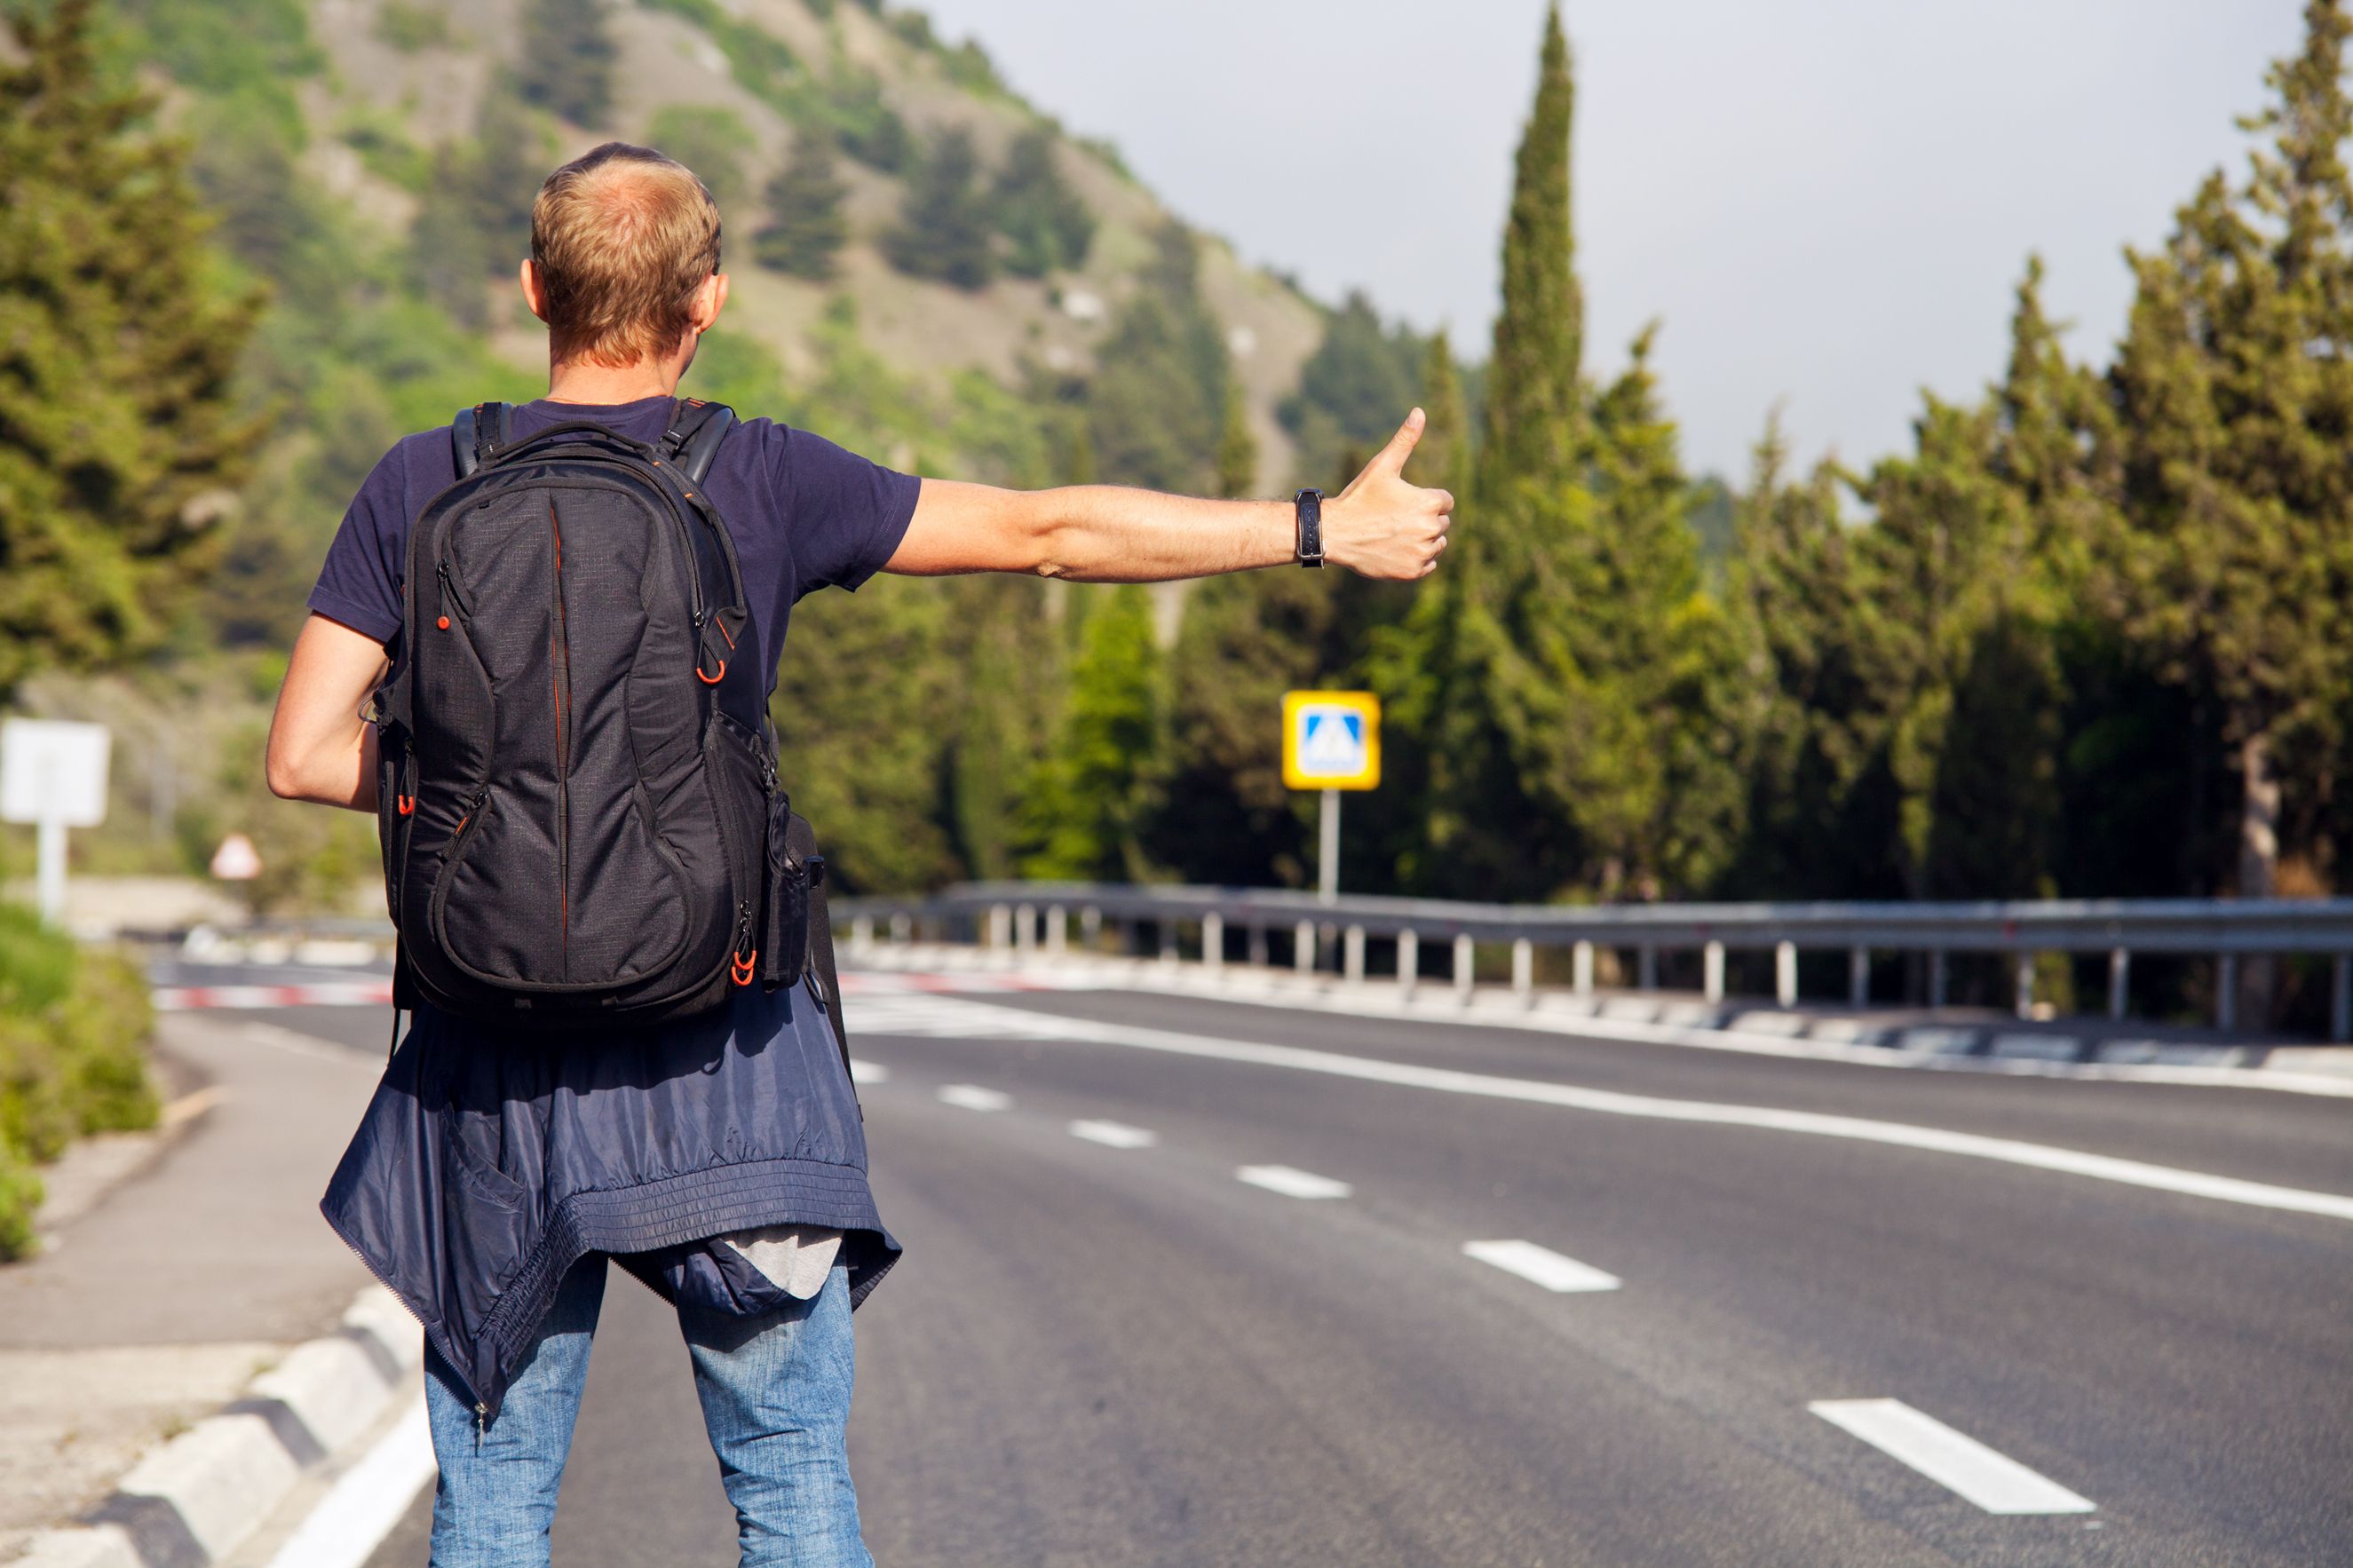 How to become a hitchhiker expert with these 5 rules!